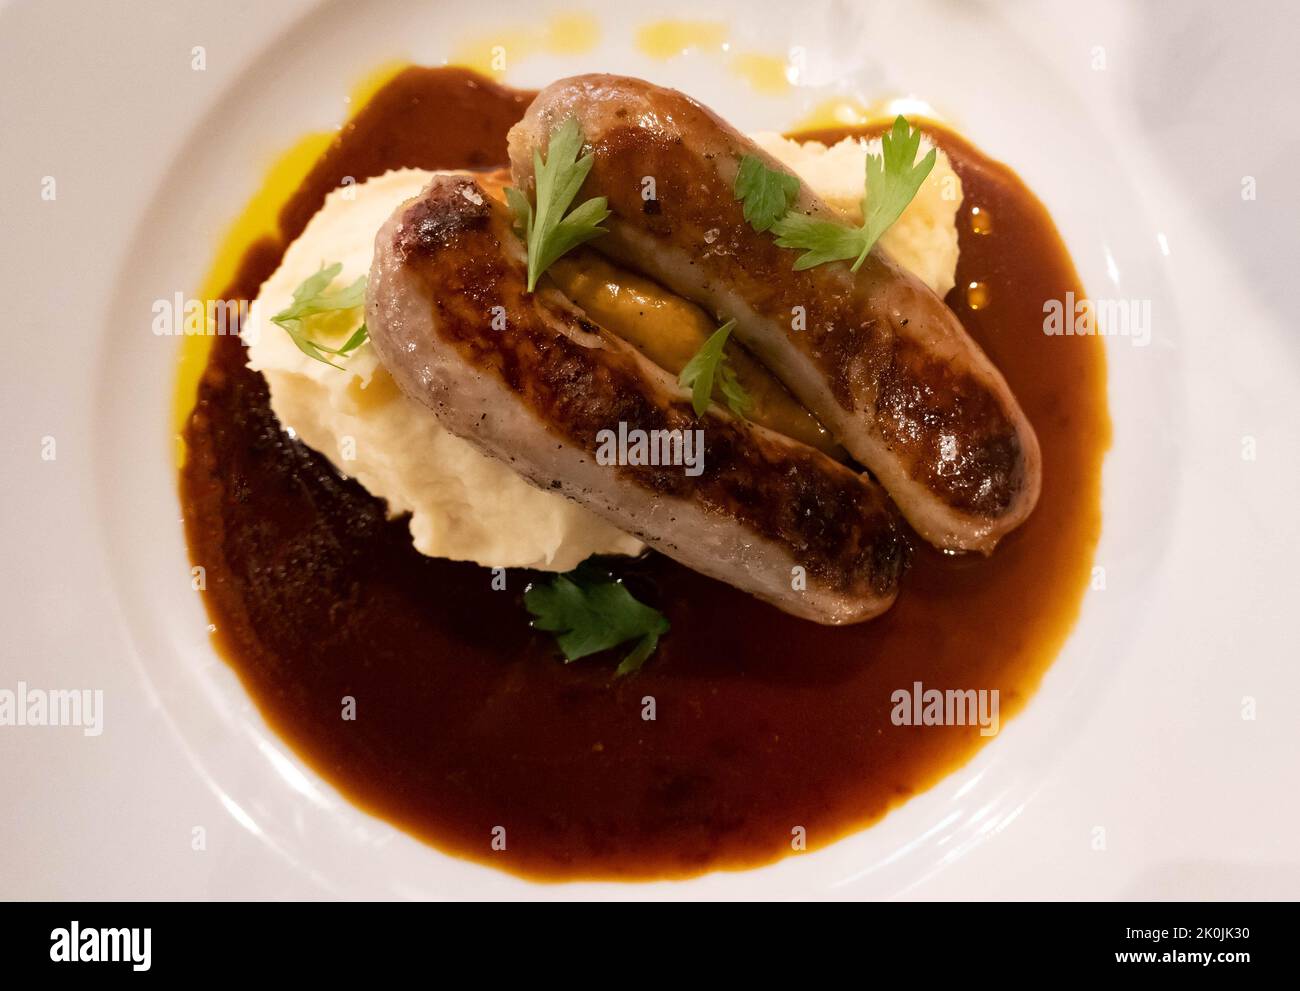 Cumberland sausage with mashed potatoes and gravy Stock Photo